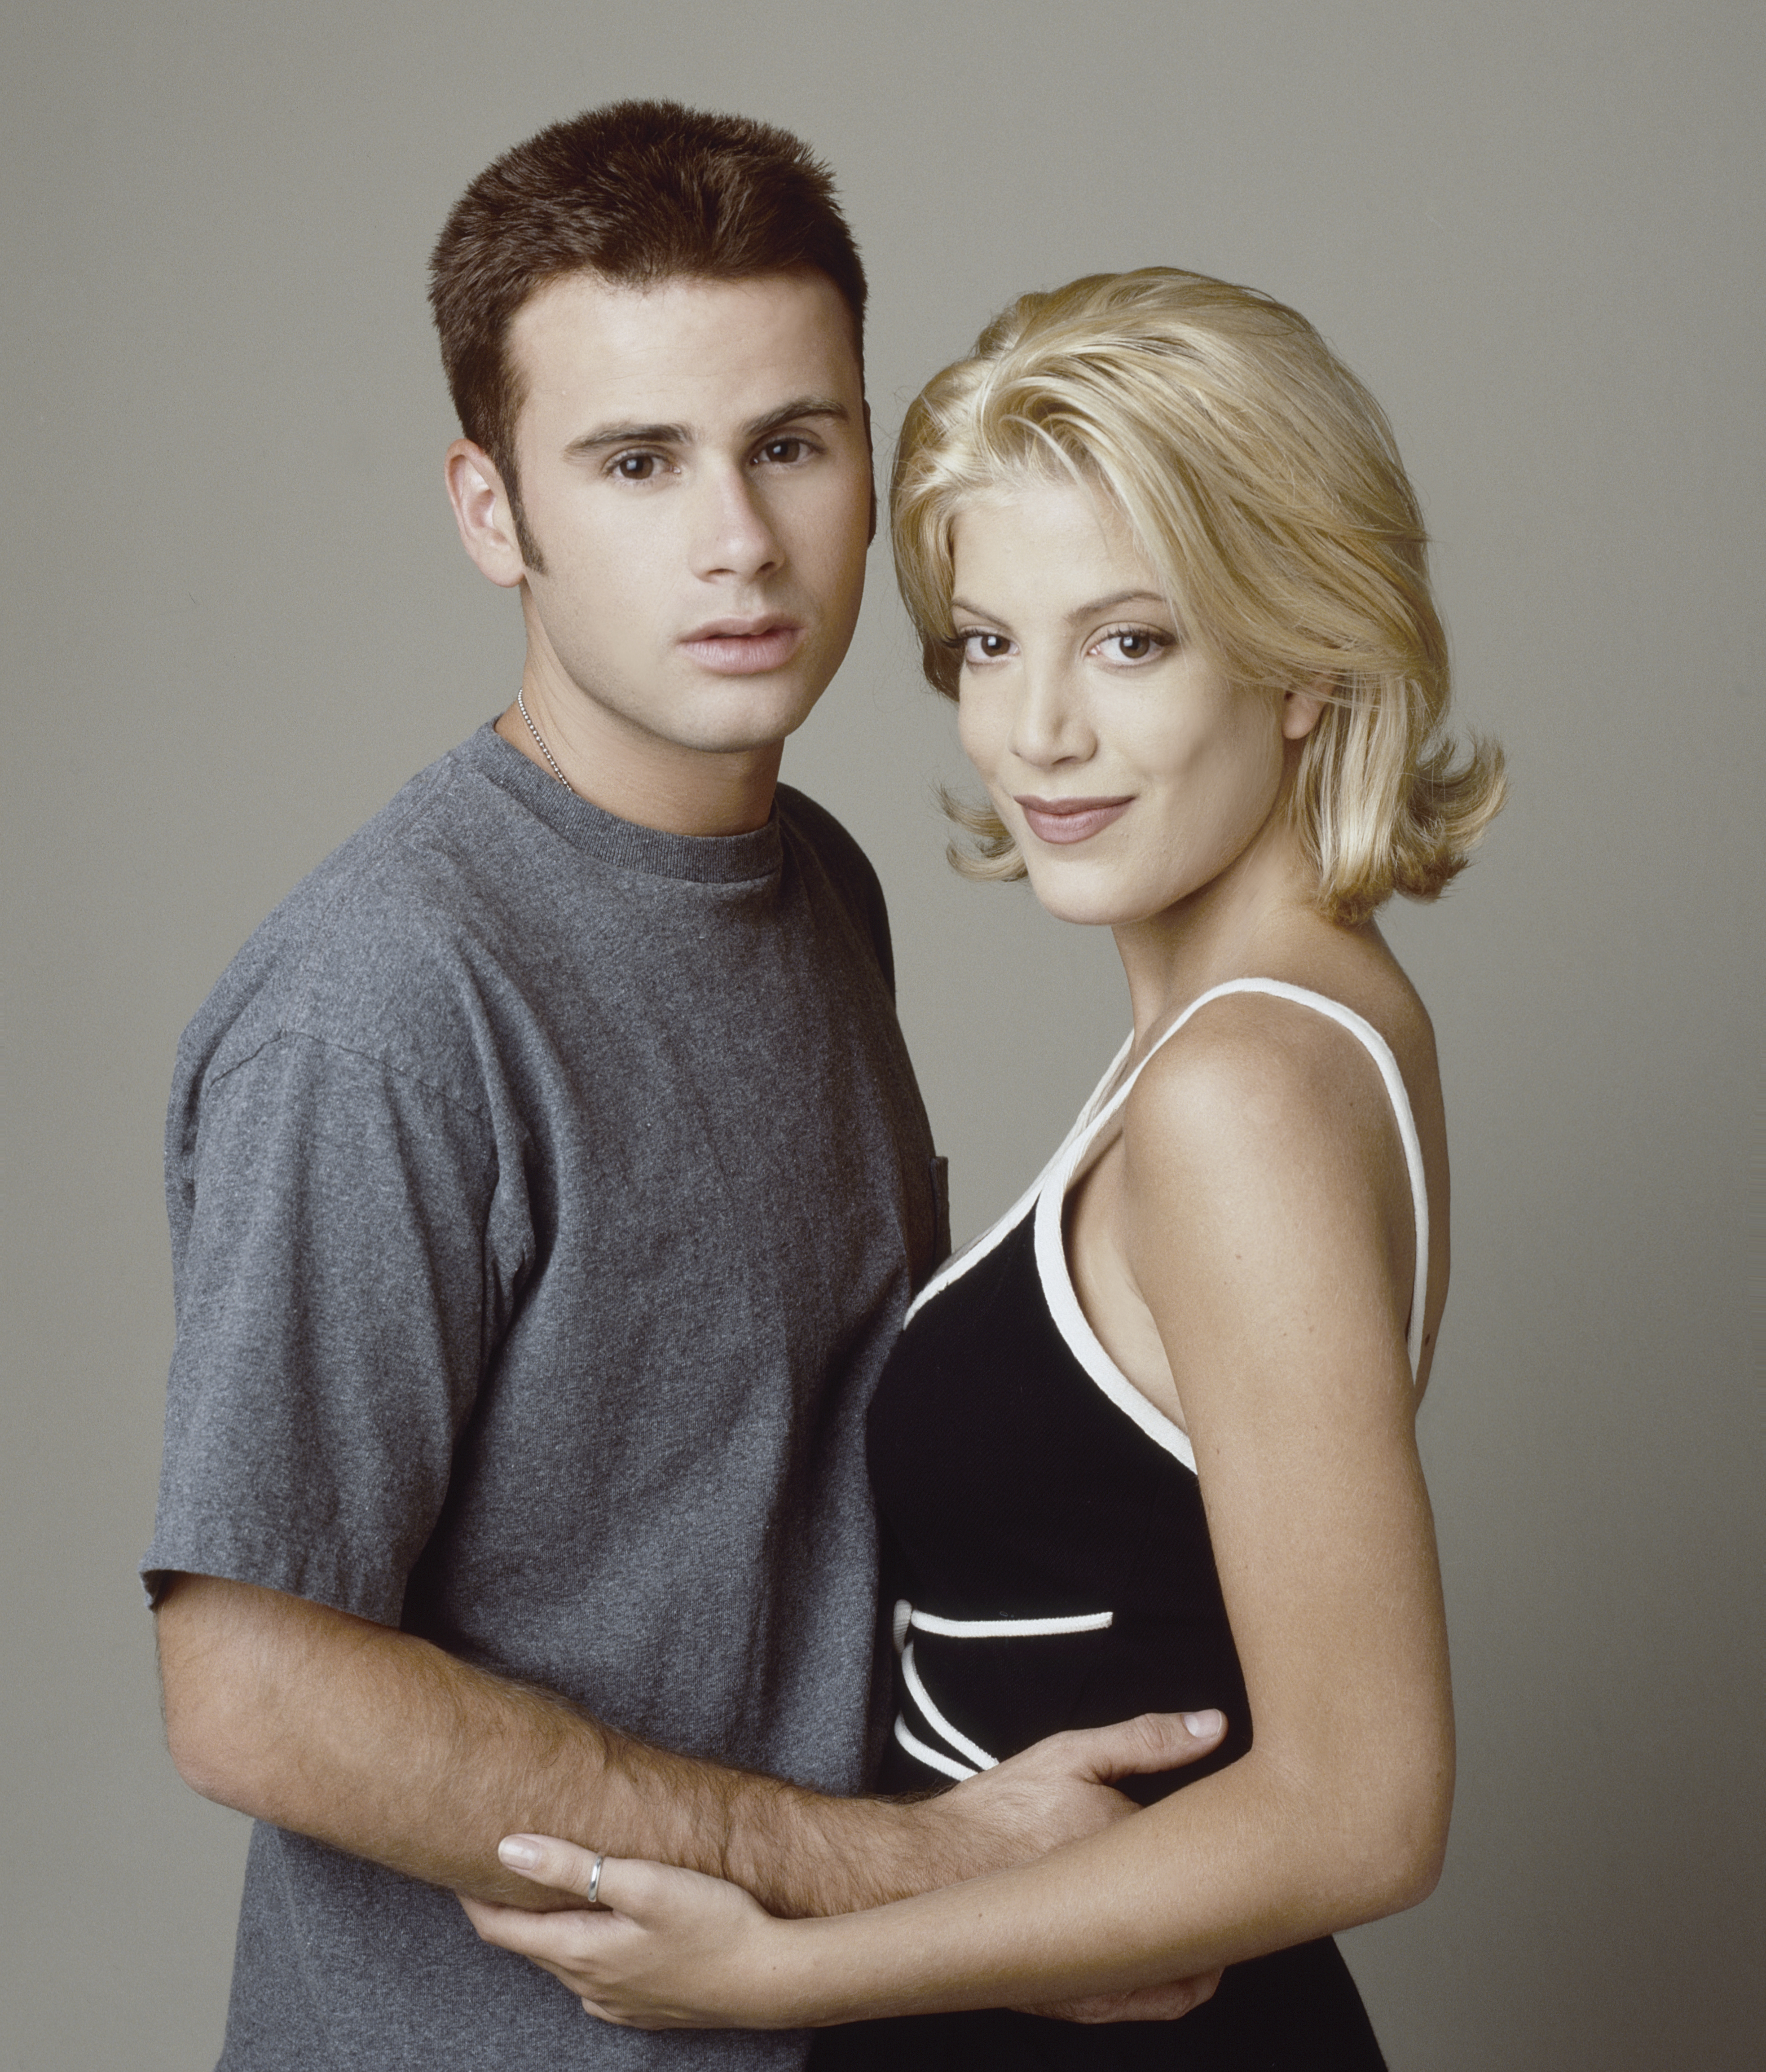 Jamie Walters and Tori Spelling of "Beverly Hills, 90210" posing for a portrait in February 1990 in Los Angeles, California. | Source: Getty Images